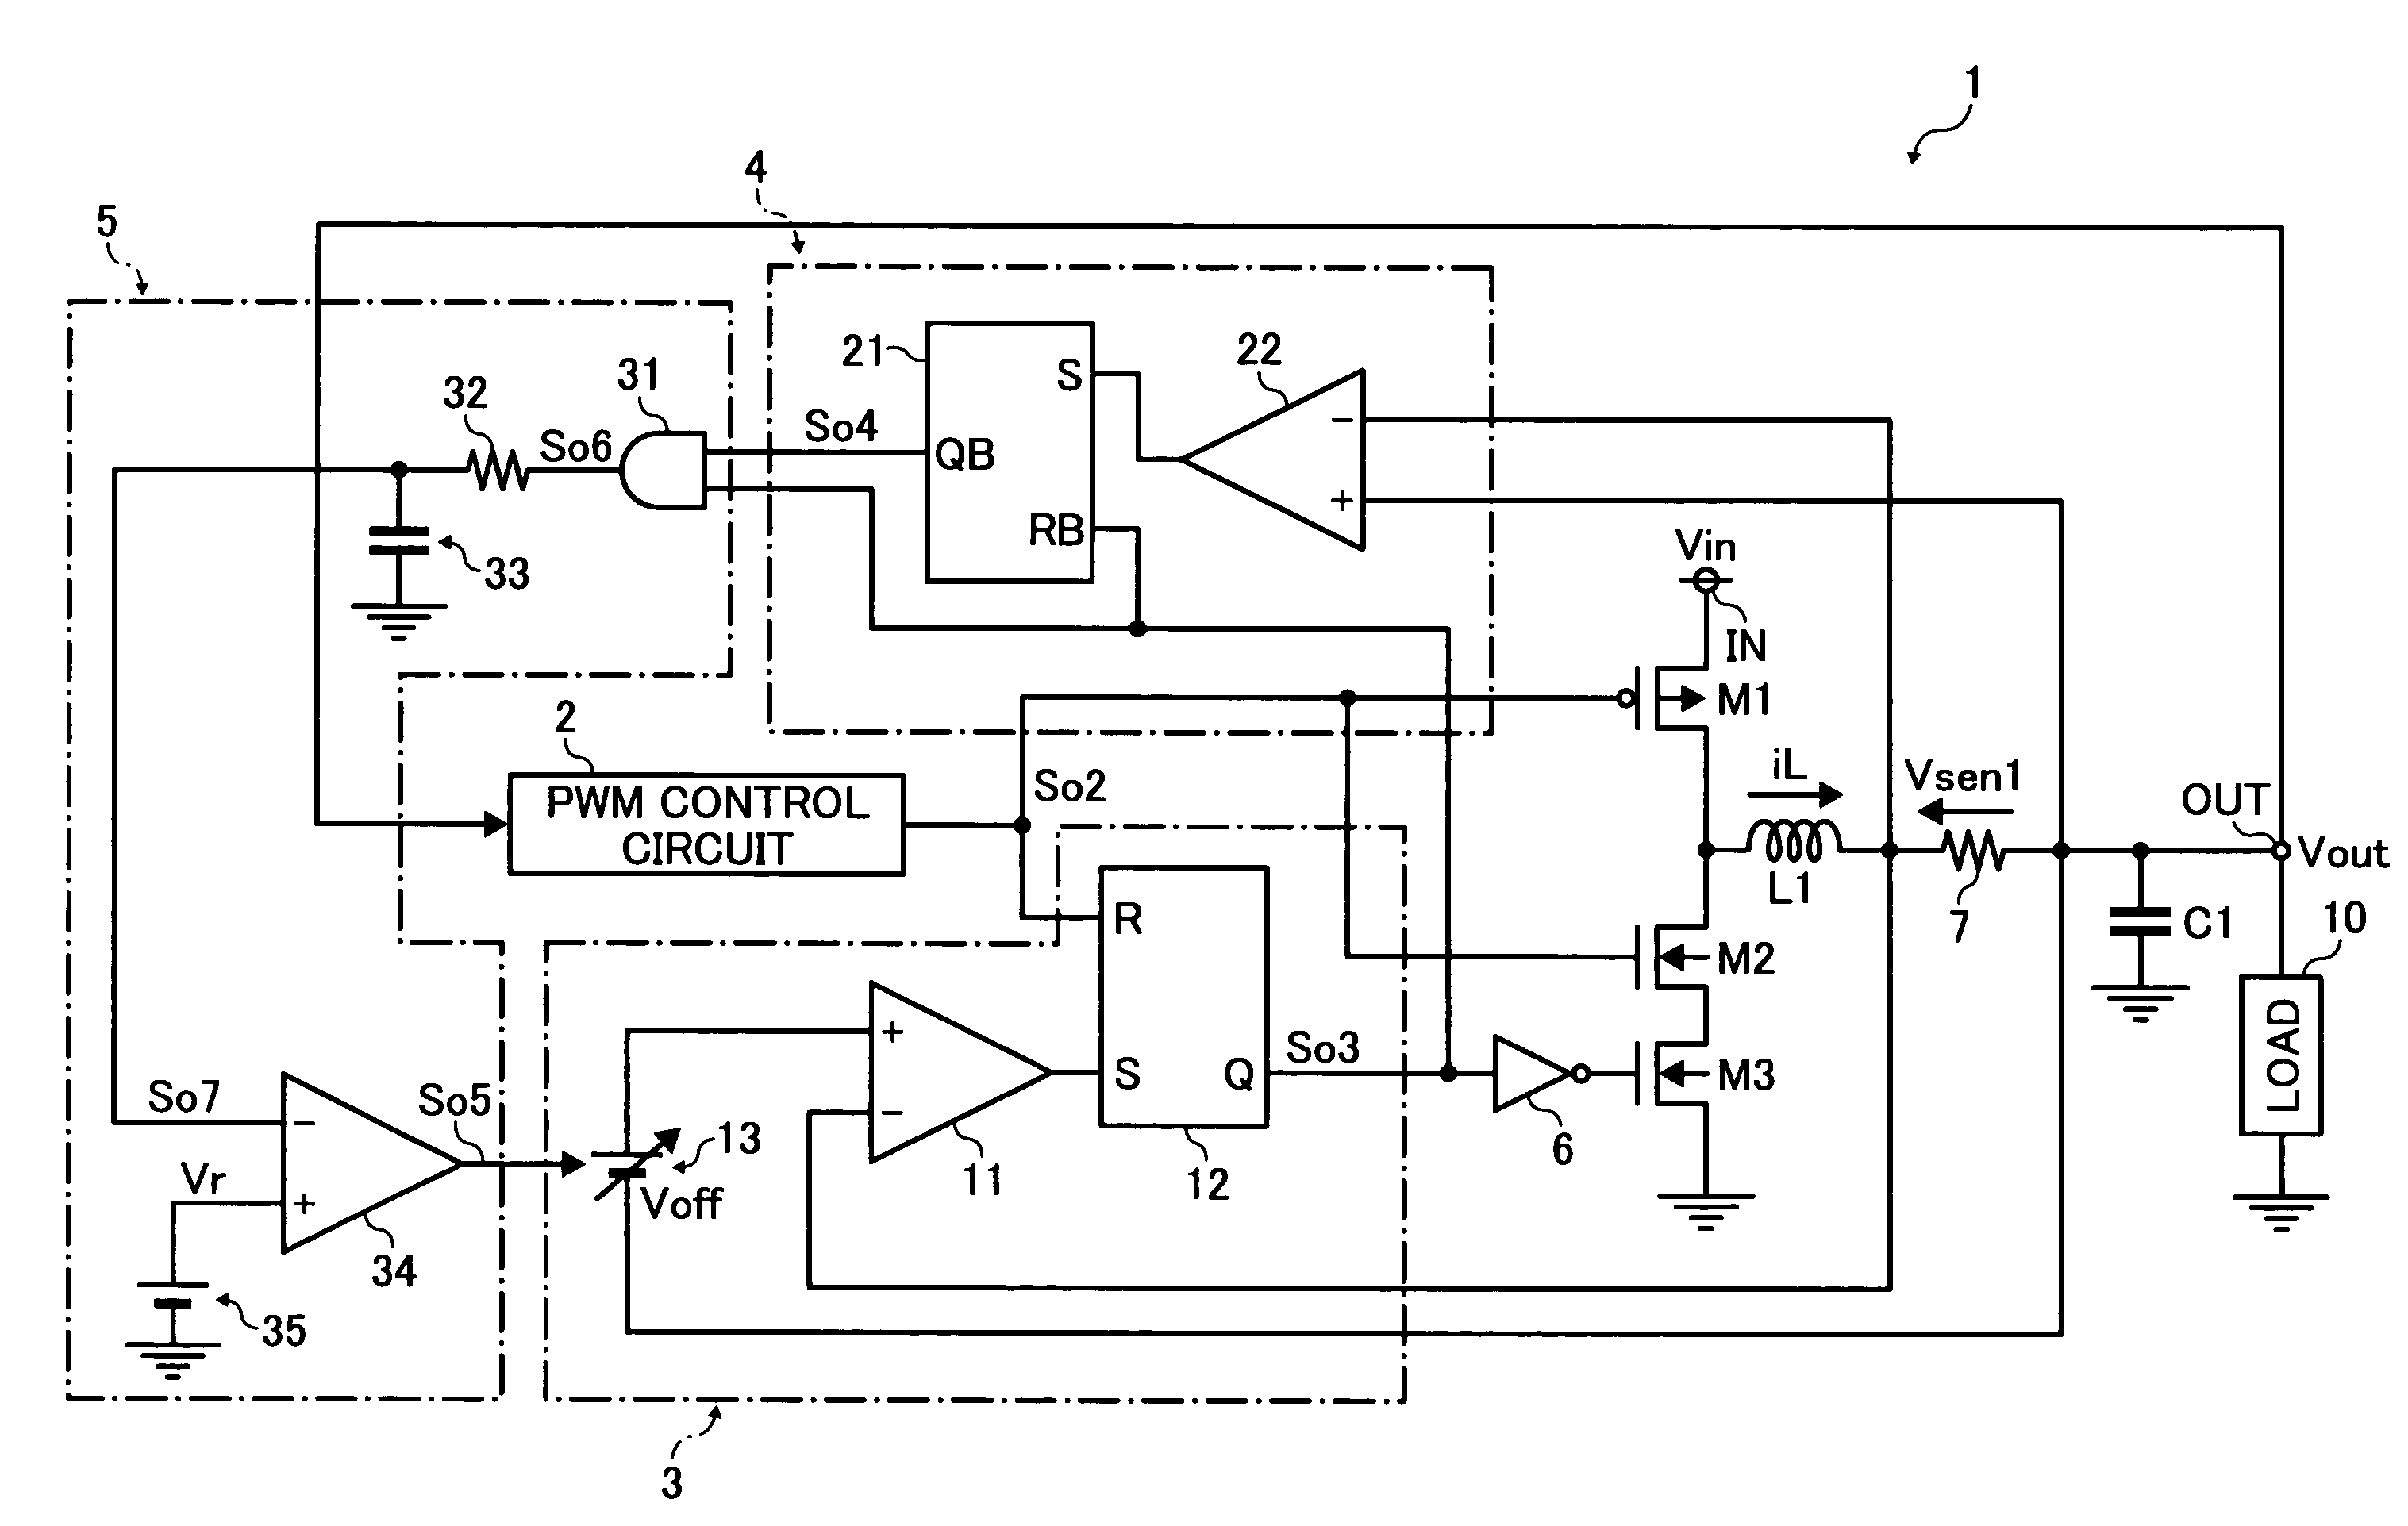 Synchronous rectification switching regulator, control circuit for synchronous rectification switching regulator, and control method for synchronous rectification switching regulator